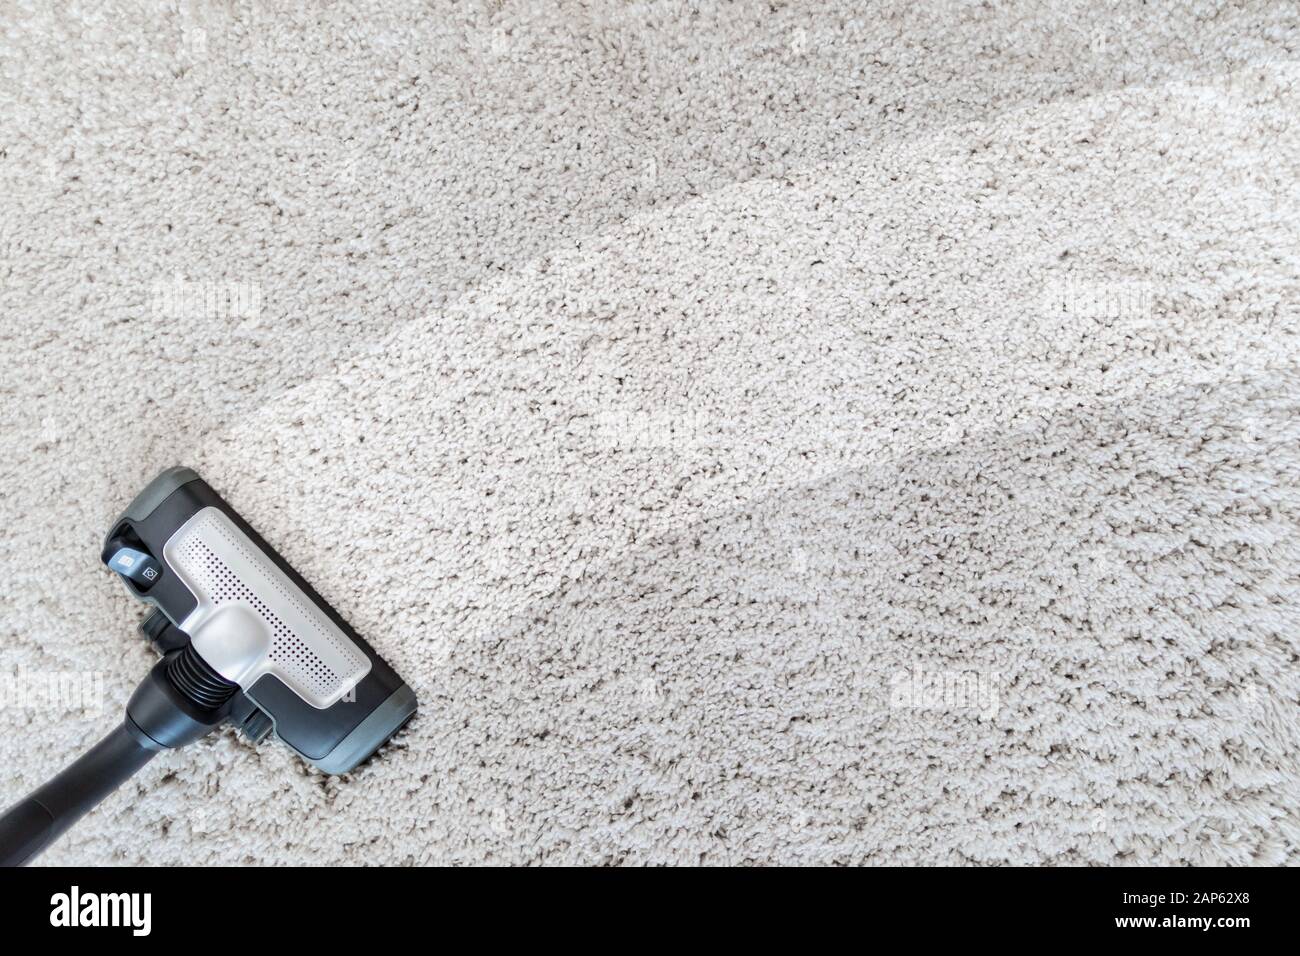 Cleaning carpet hoover. Carpet texture background. Stock Photo